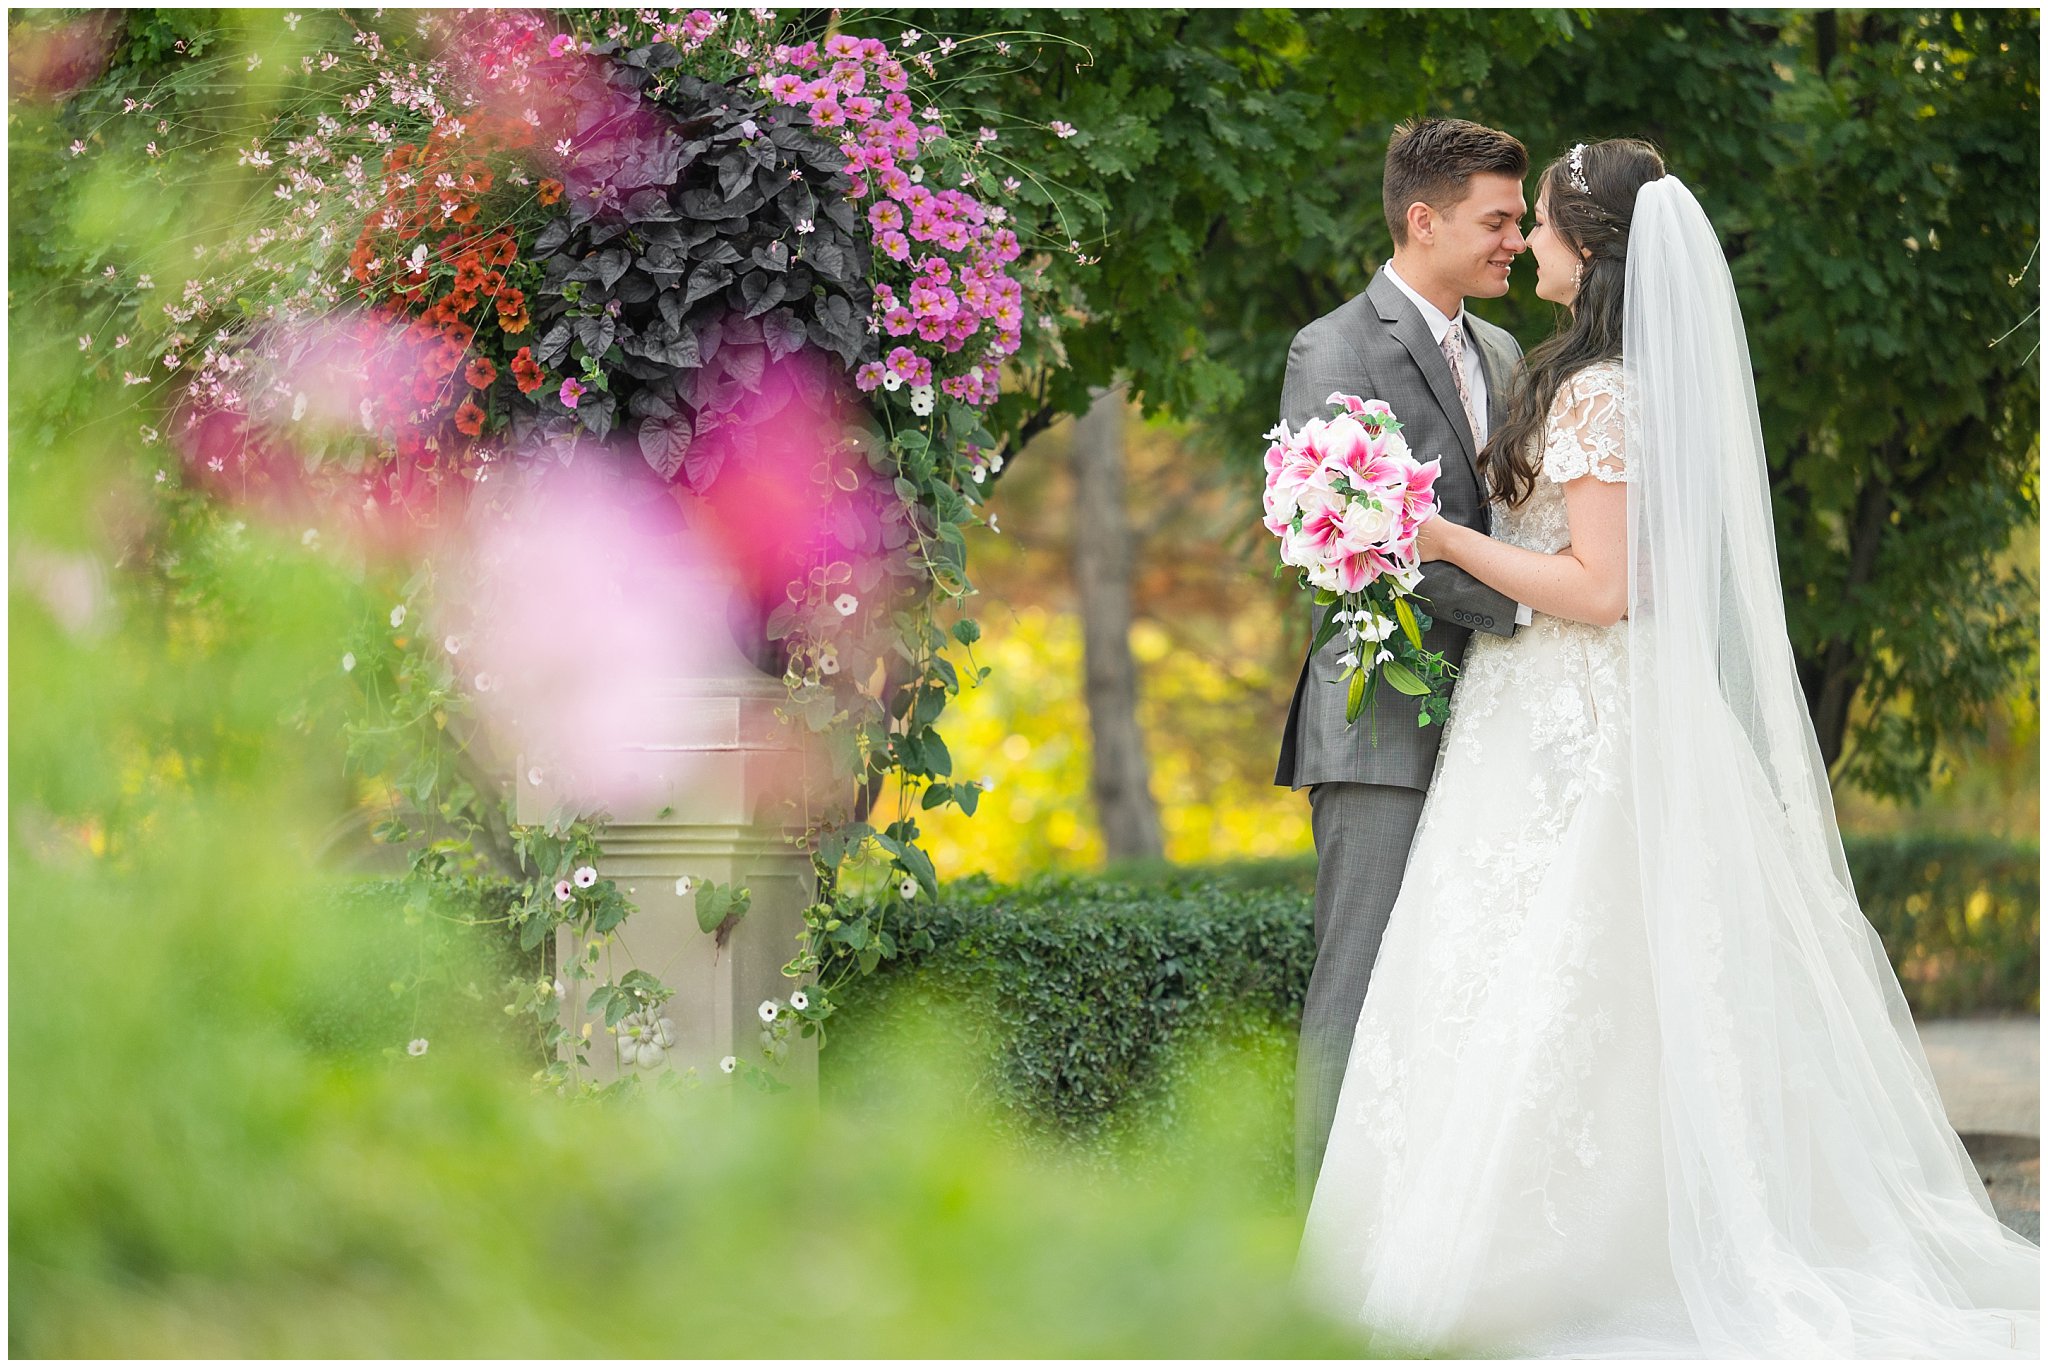 Bride and Groom laughing during wedding portraits during the summer surrounded by flowers and gardens | Thanksgiving Point Ashton Garden Formal Session | Jessie and Dallin Photography